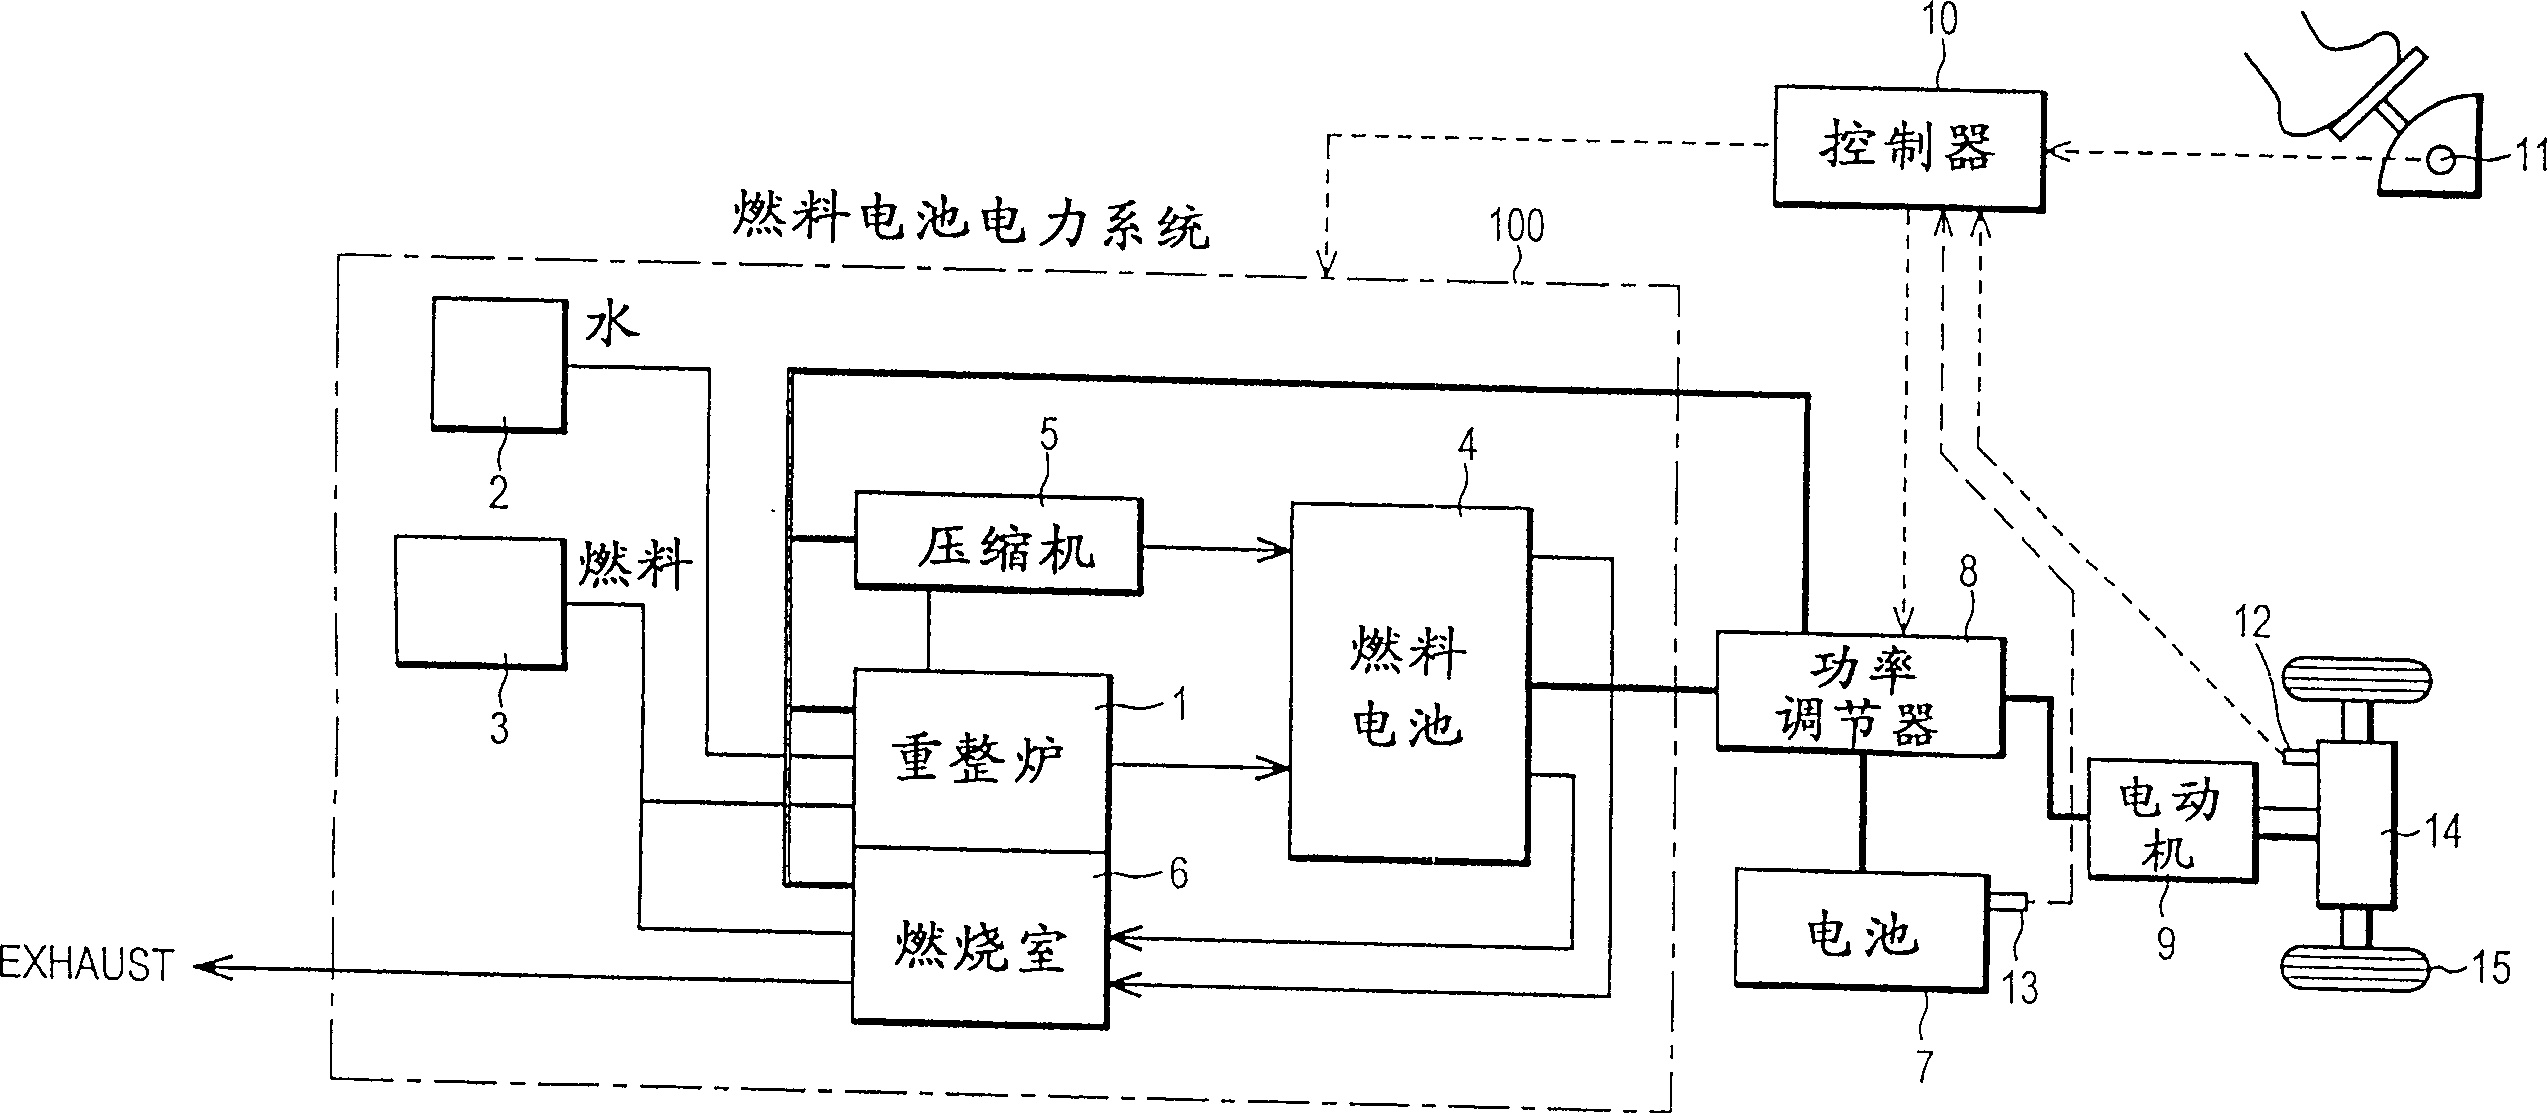 Operating load control for fuel cell power system in fuel cell vehicle